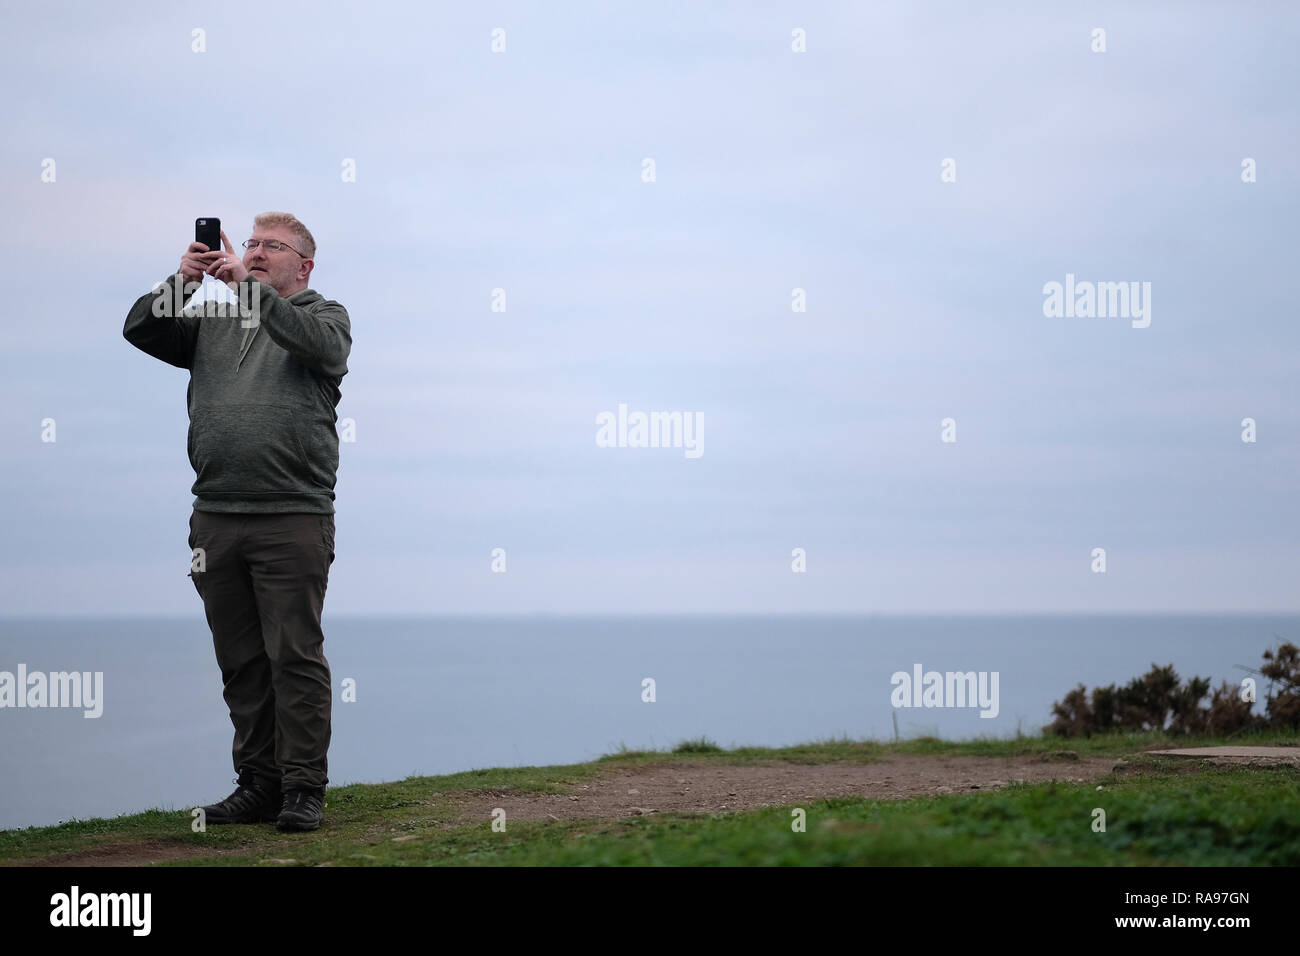 A man on a hill by the sea taking a selfie in Cornwall, UK. Stock Photo